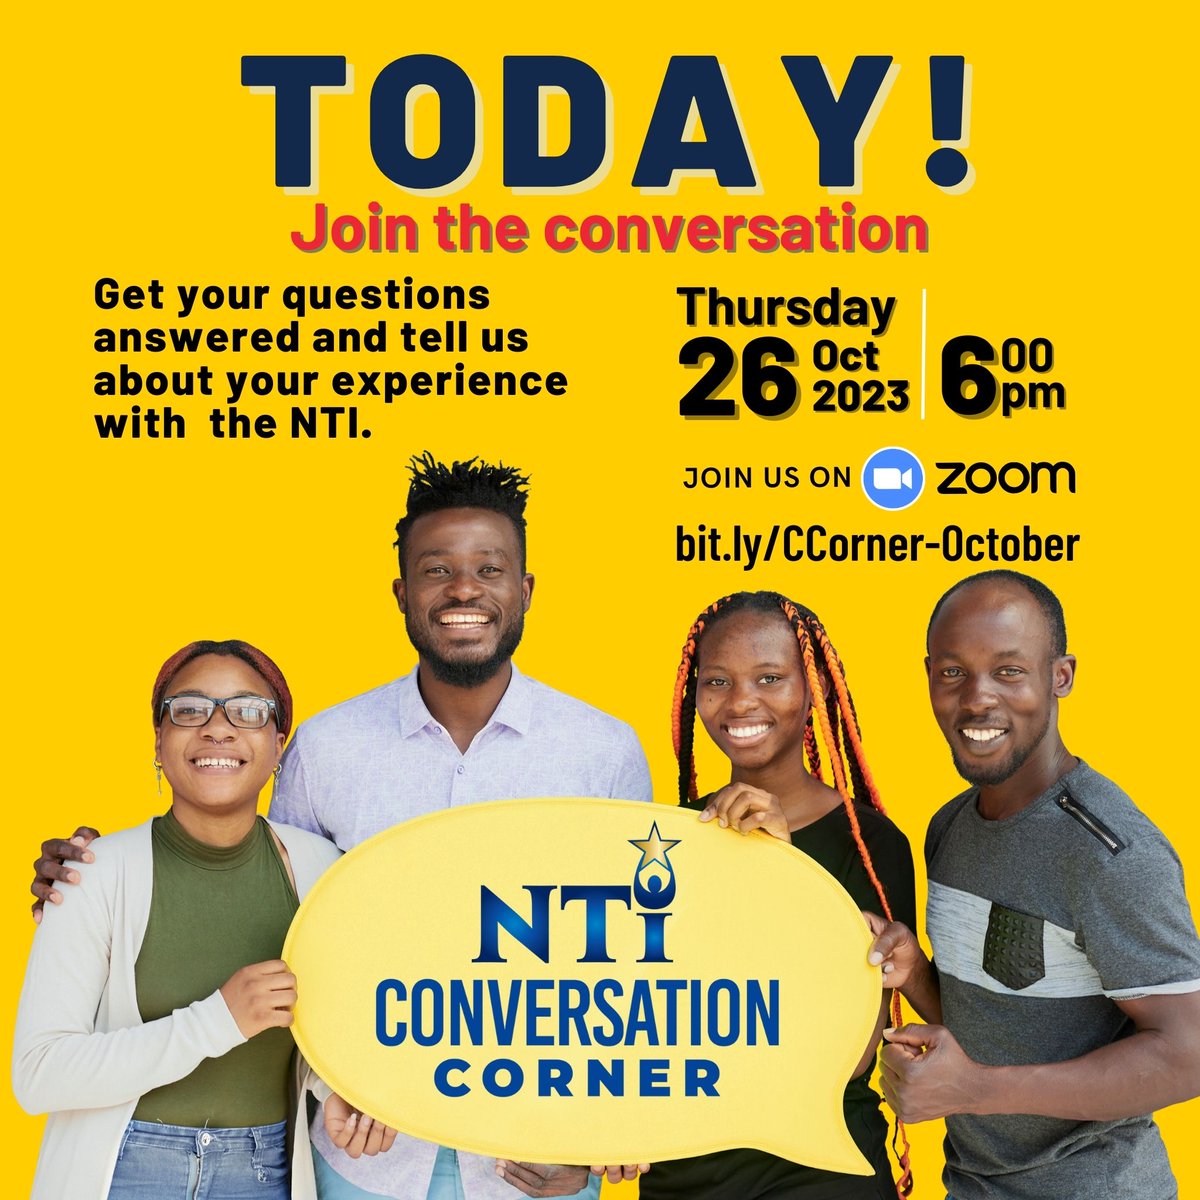 Today! Today! Today! NTI Artivist Alex Jordan is joining us for the NTI Conversation Corner, today, Thursday October 26, 2023. Join us by visiting the link in our bio! We can't wait to see you #ConversationCorner #NTI #FreeCourses